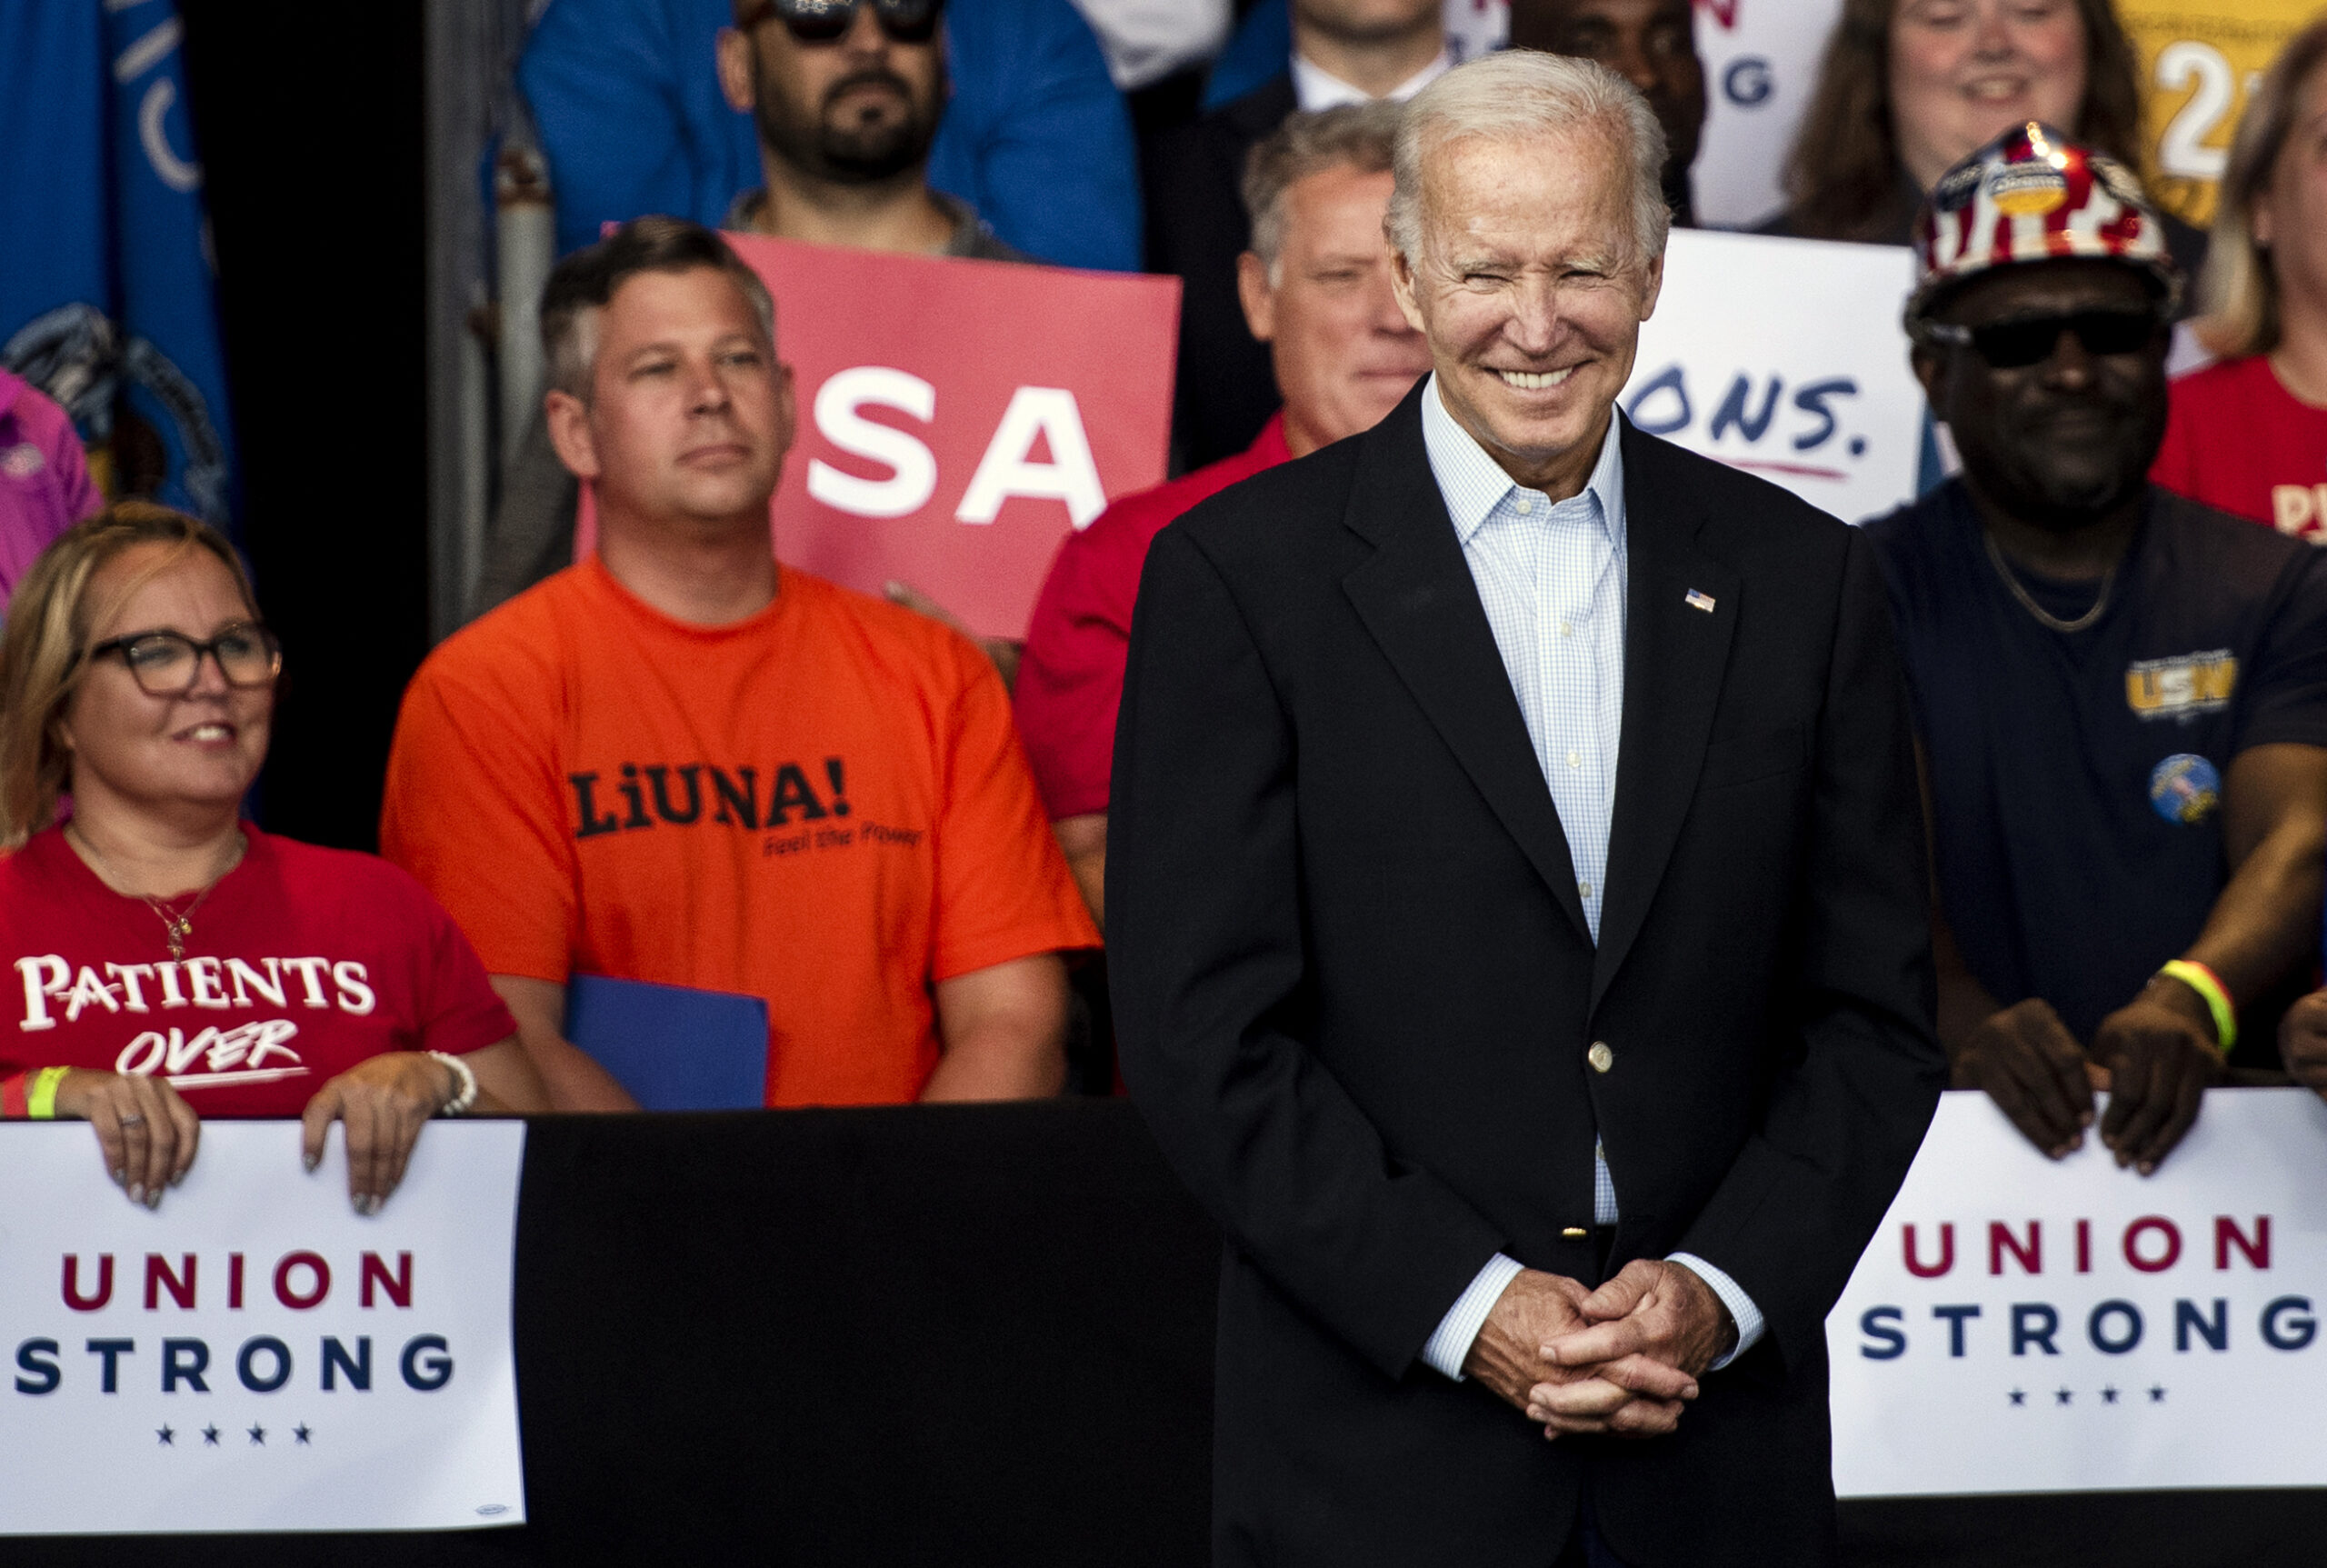 Pres. Biden smiles as he stands with his hands clasped. Supporters behind him hold signs that say, "union strong."